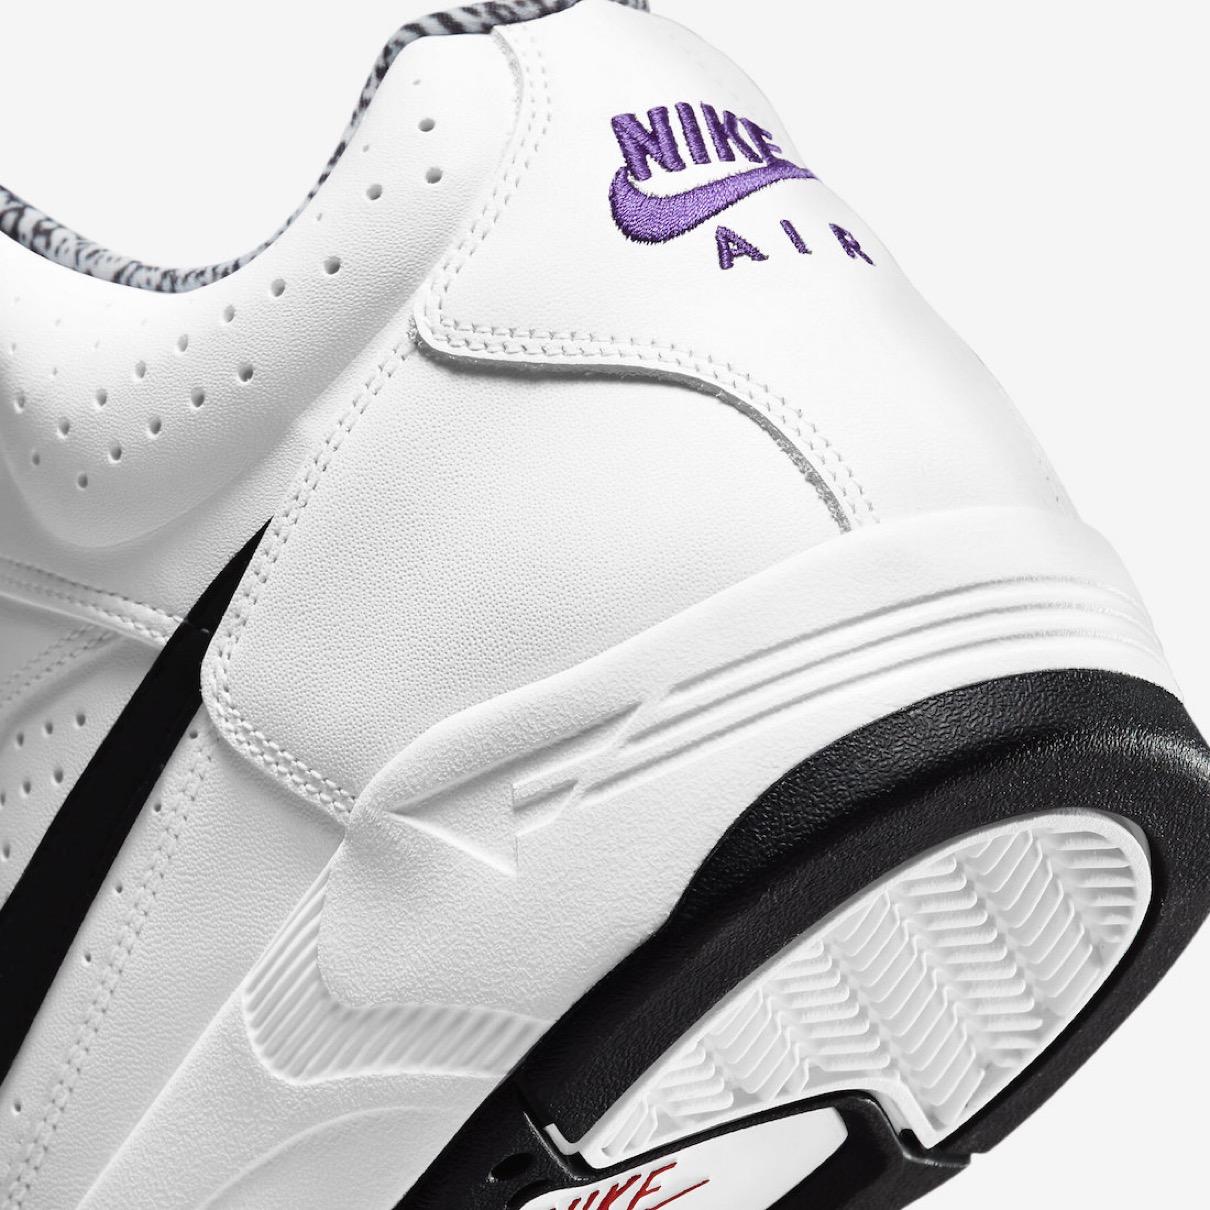 Nike Air Flight Lite Mid “White”が2021年10月21日に復刻発売予定 | UP TO DATE